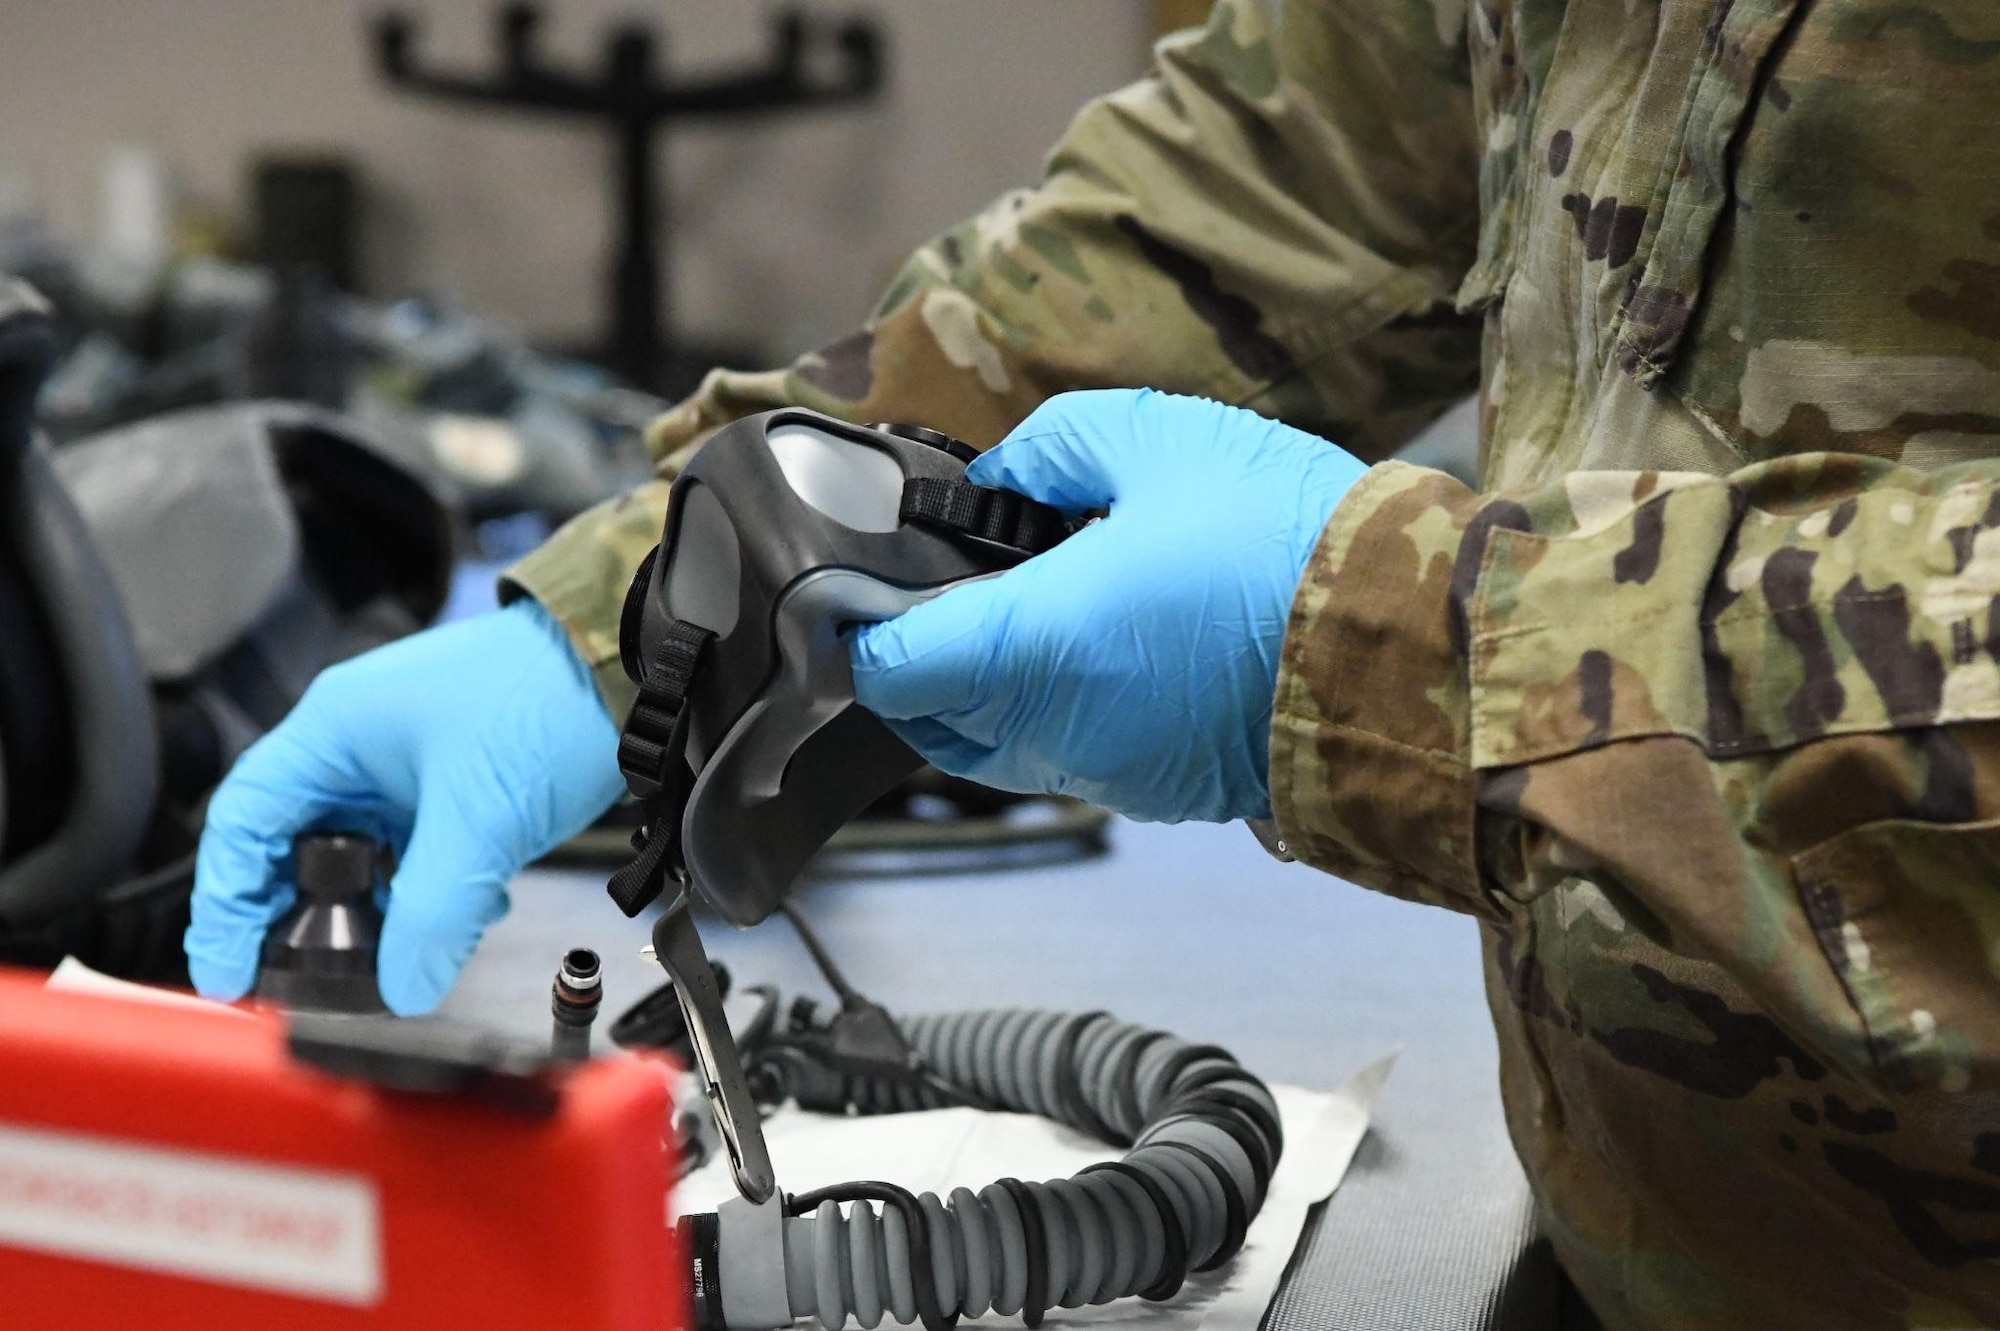 Tech. Sgt. Derrick Eldridge, 301st Fighter Wing Aircrew Flight Equipment non-commissioned officer in charge, maintains an F-16 Fighting Falcon pilot helmet's oxygen mask insert at U.S. Naval Air Station Joint Reserve Base Fort Worth, Texas, Sept. 29, 2021. Besides maintaining routine flight equipment inspections, AFE also conducts water survival training every three years where pilots training for various scenarios should the have to eject from their aircraft. (U.S. photo Air Force by Staff. Sgt. Nije Hightower)